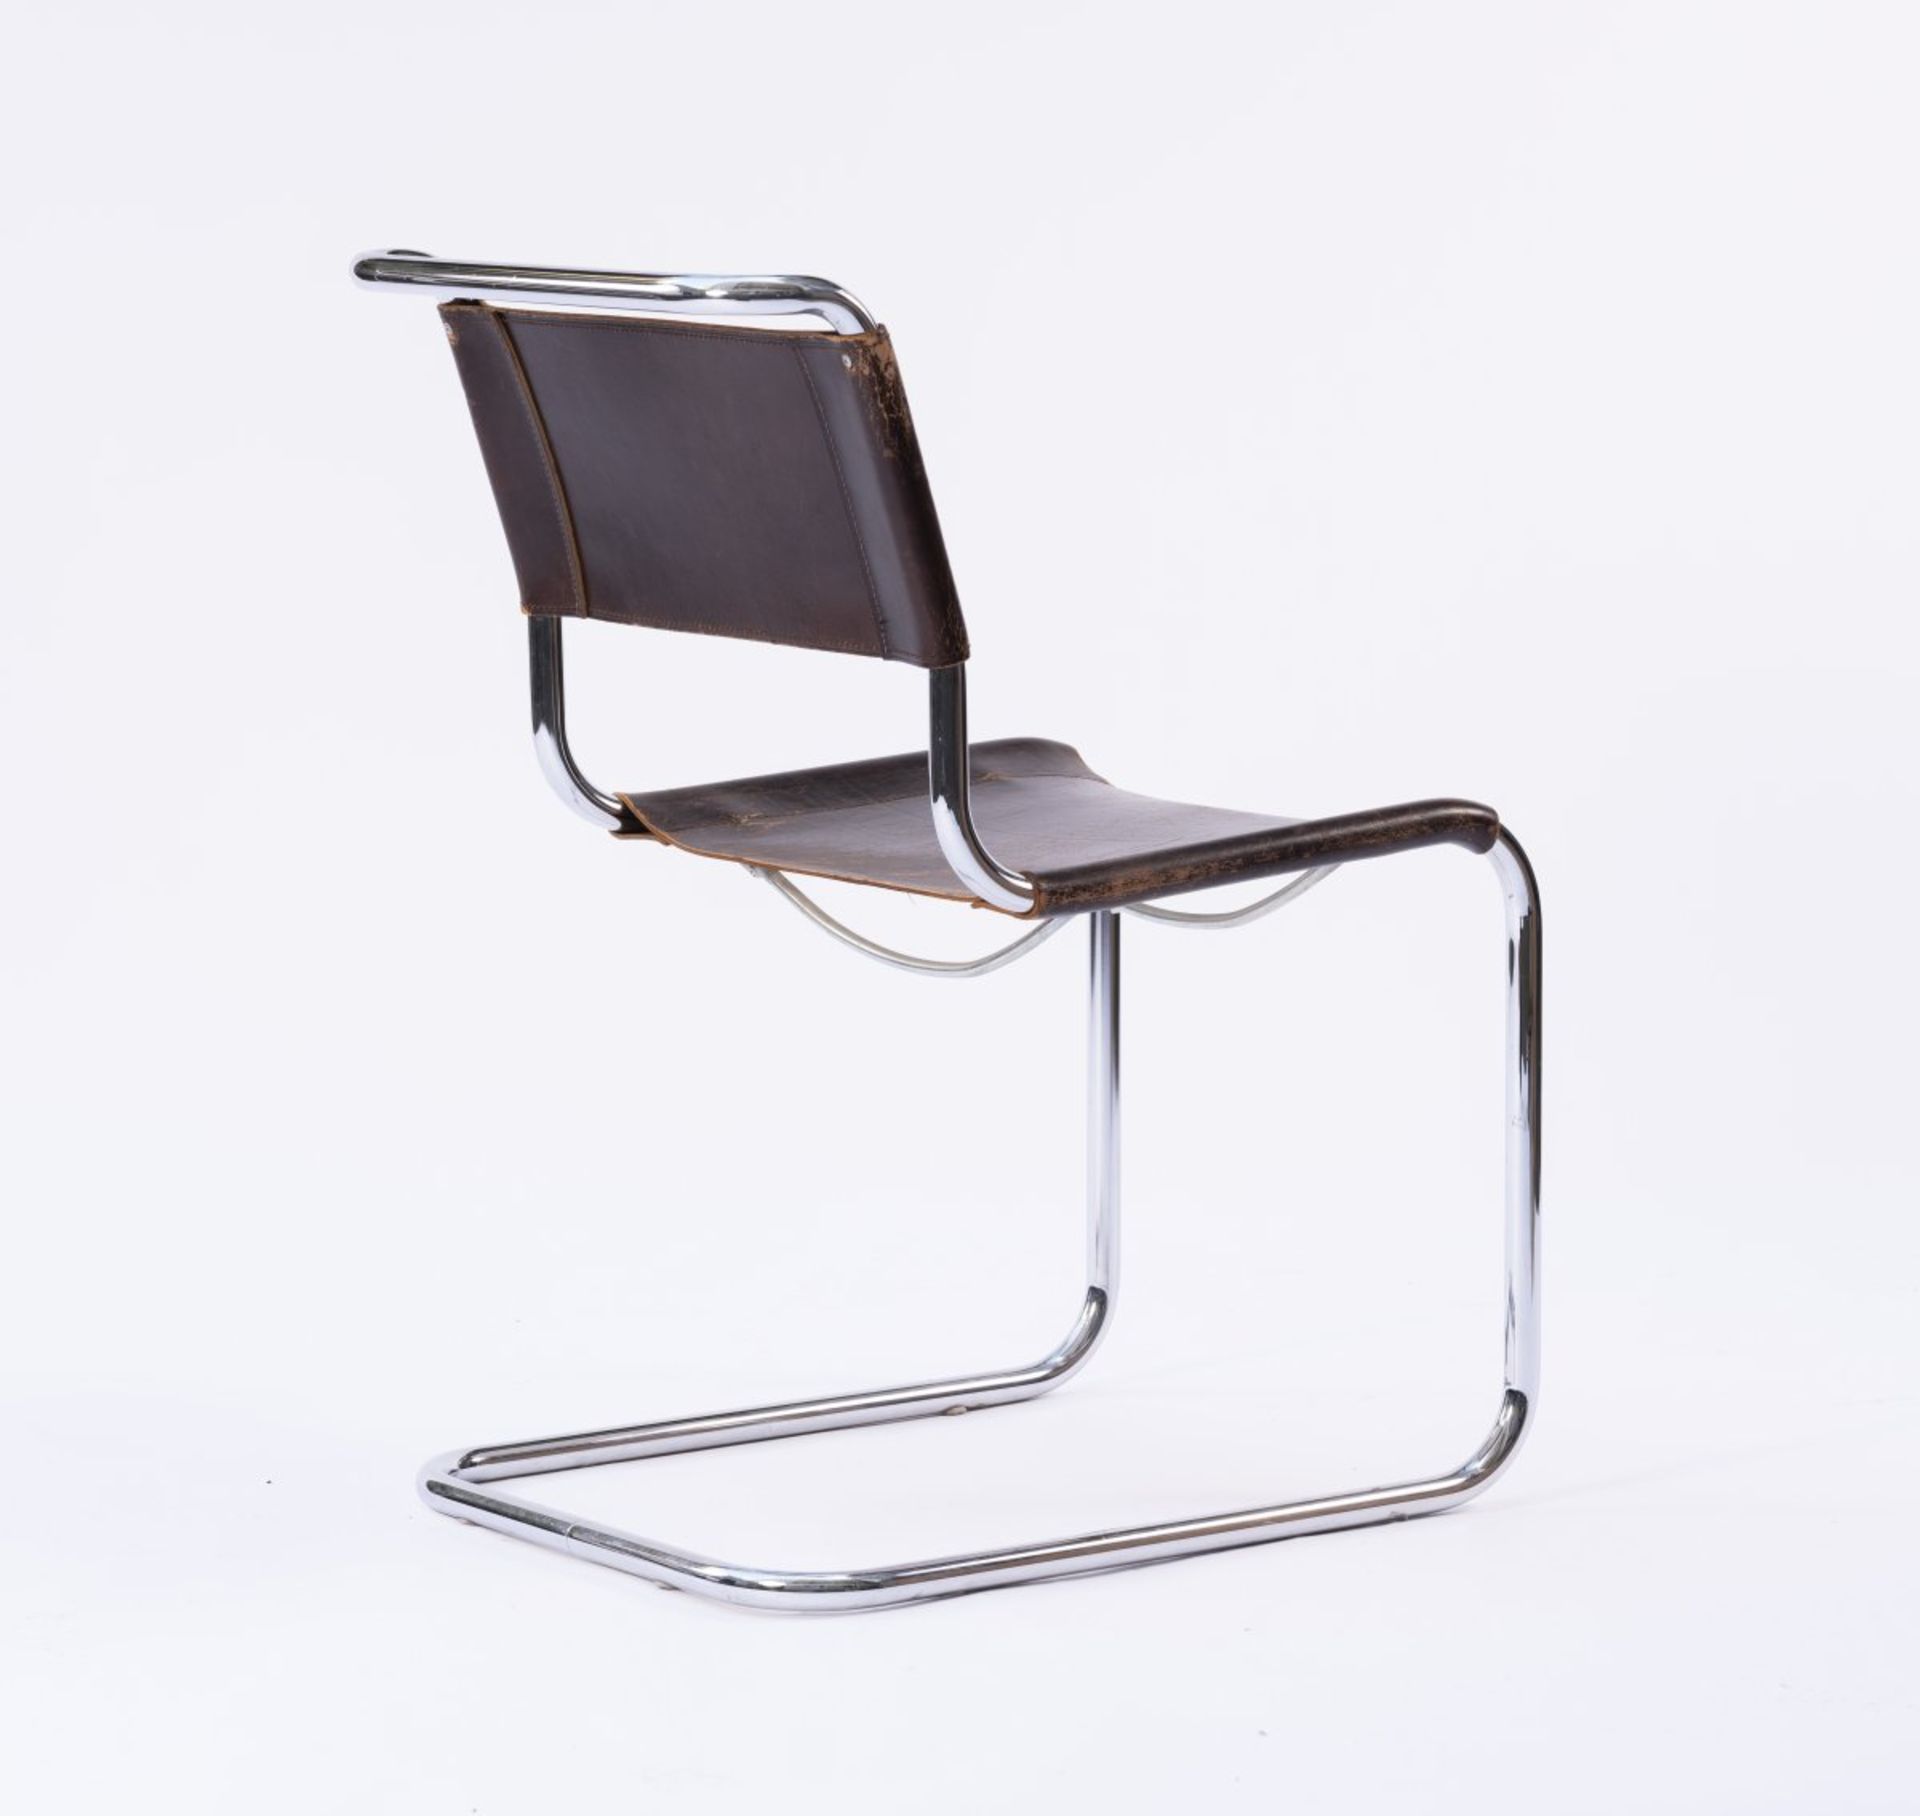 Marcel Breuer, Eight chairs 'B 33', 1927/28 - Image 12 of 14